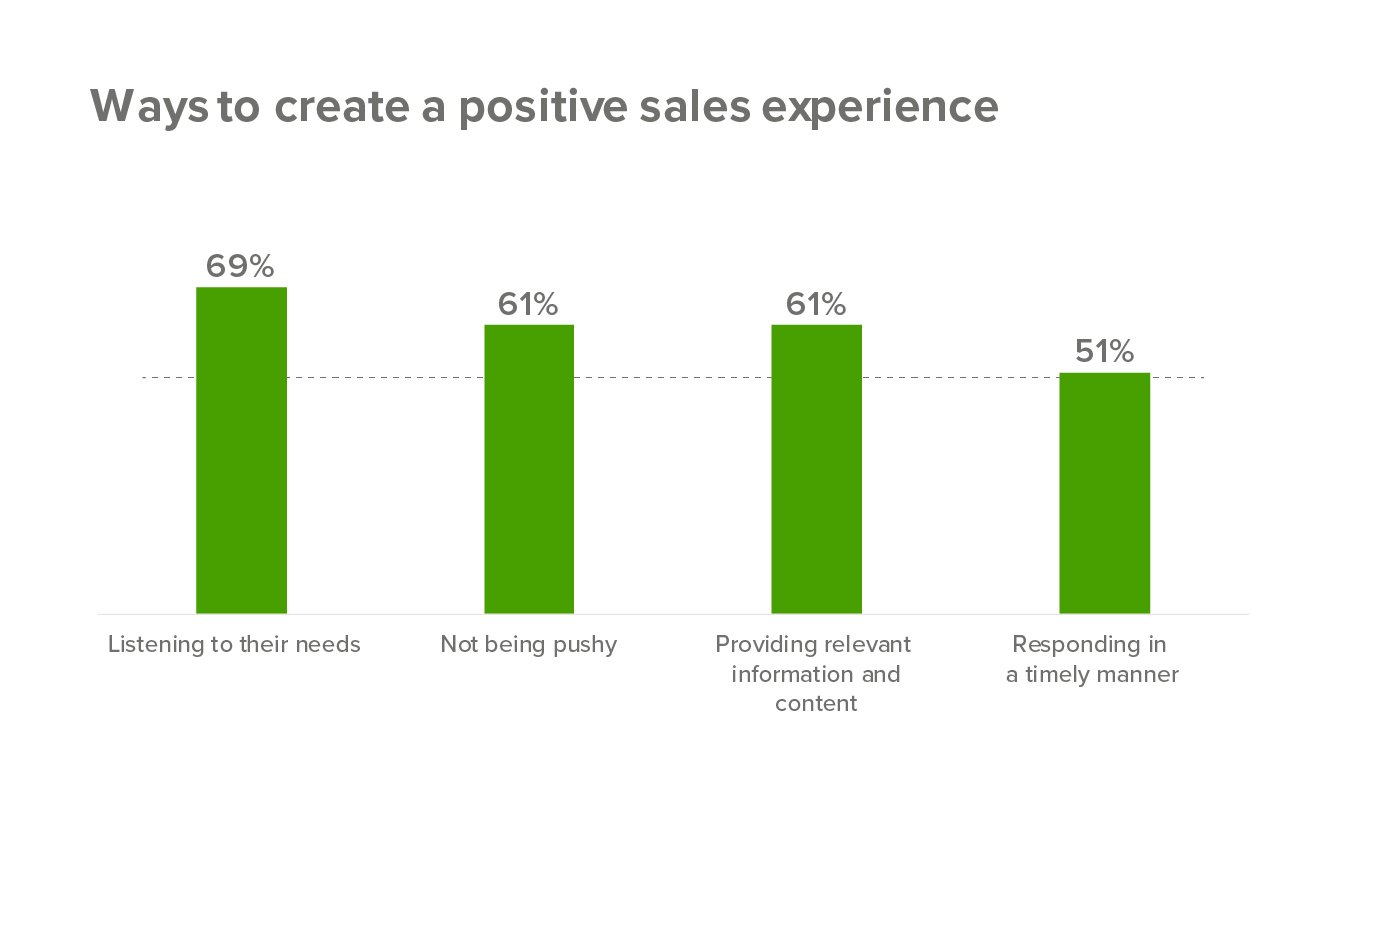 How to create a positive sales experience